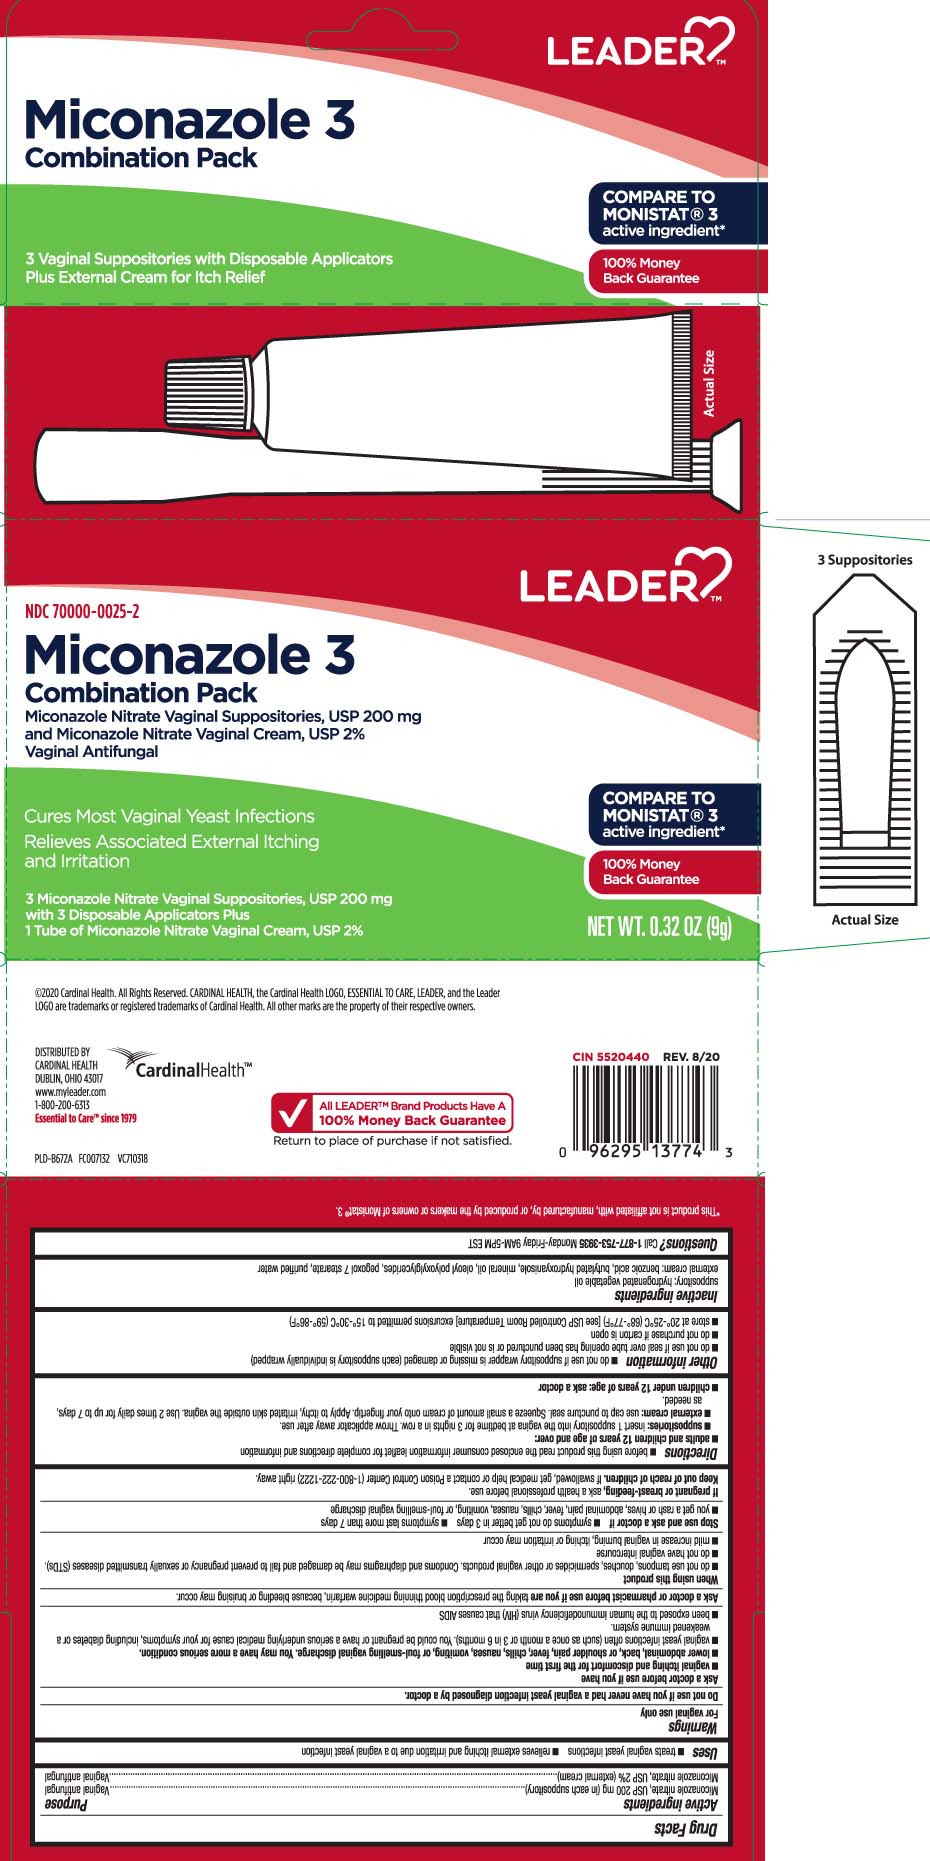 Miconazole nitrate, 200 mg (in each suppository), Miconazole nitrate, USP 2% (external cream)